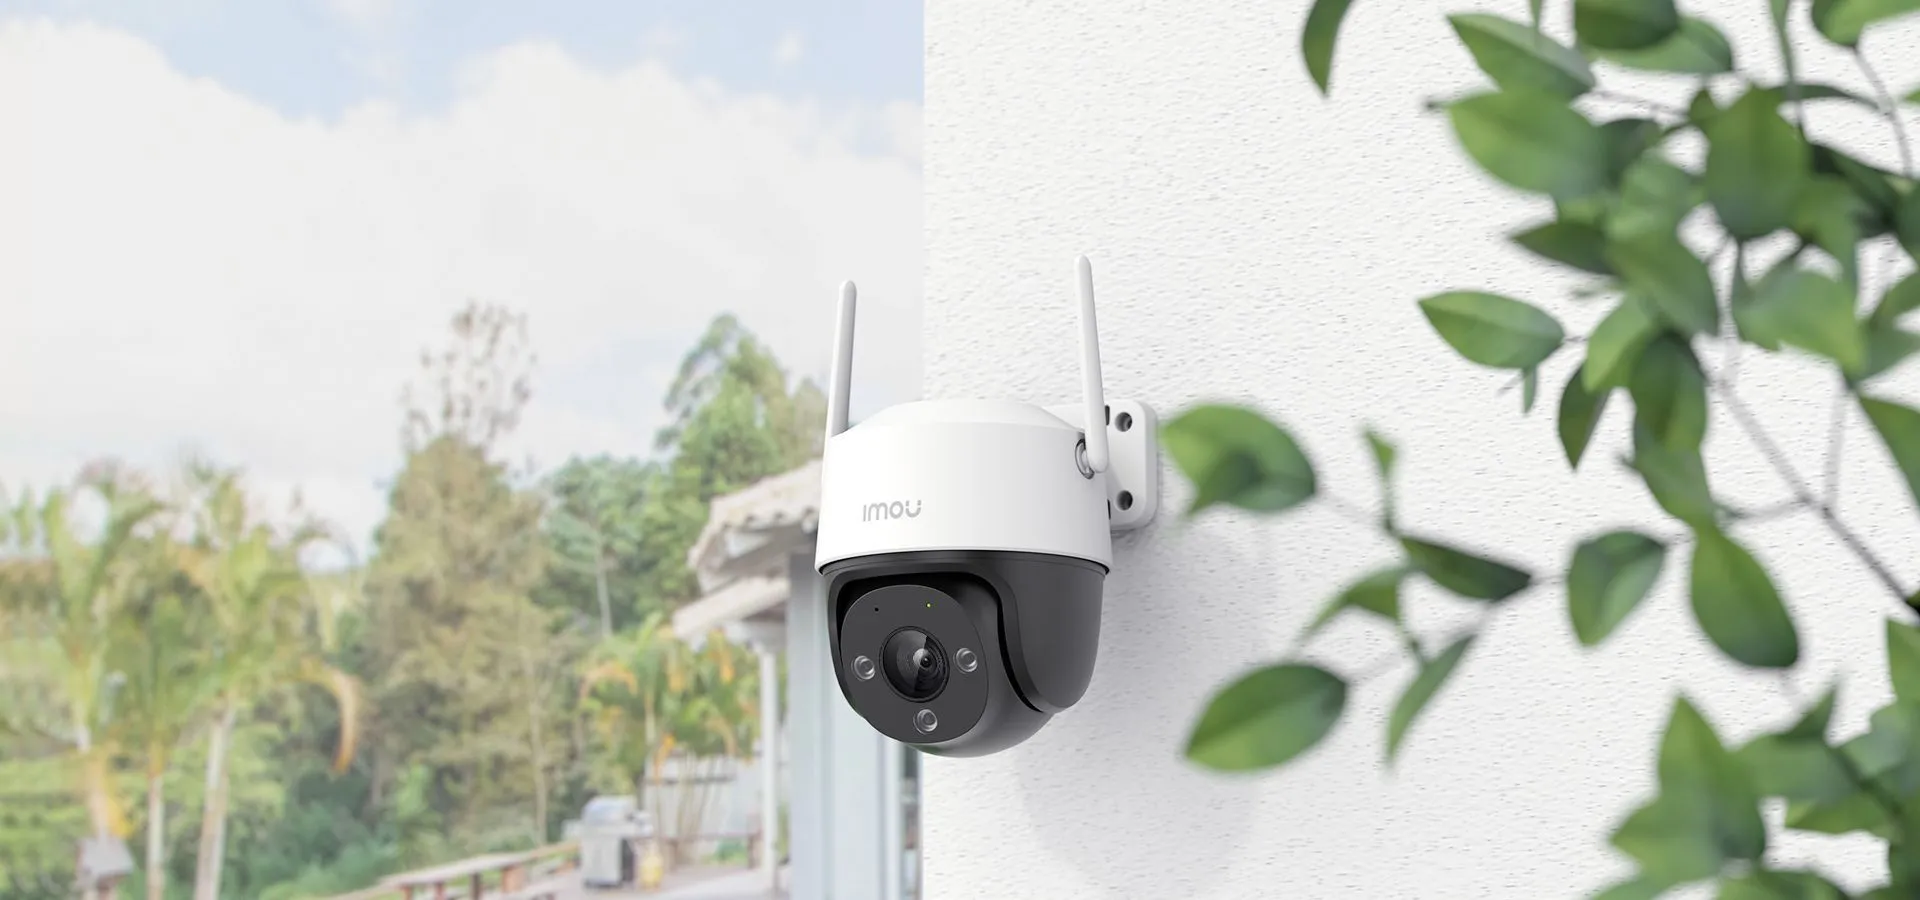 IP66 weather-resistant for year-round security